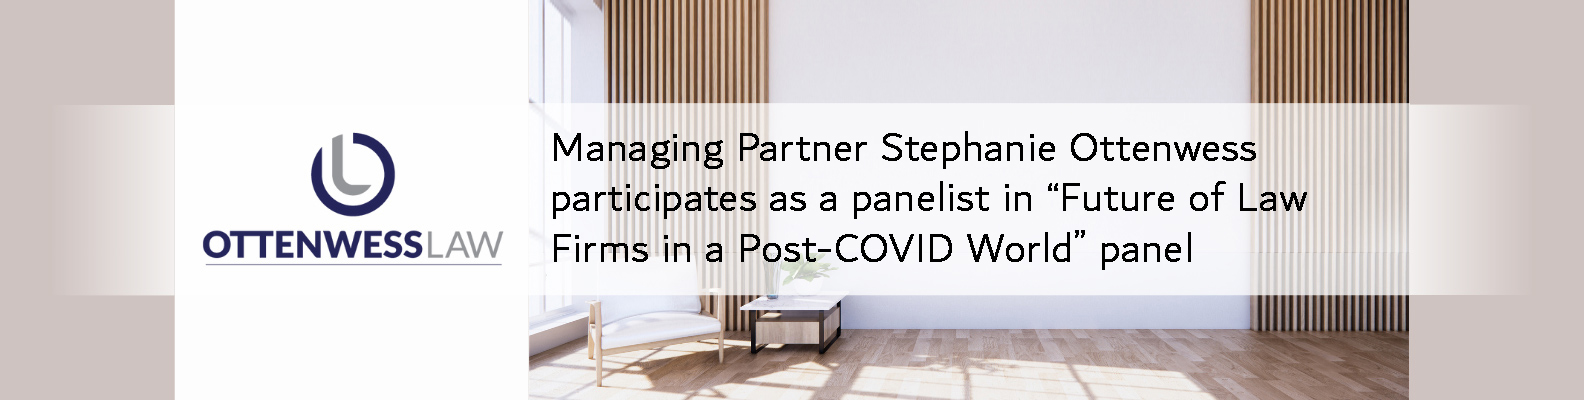 Managing Partner Stephanie Ottenwess participates as a panelist in “Future of Law Firms in a Post-COVID World” panel